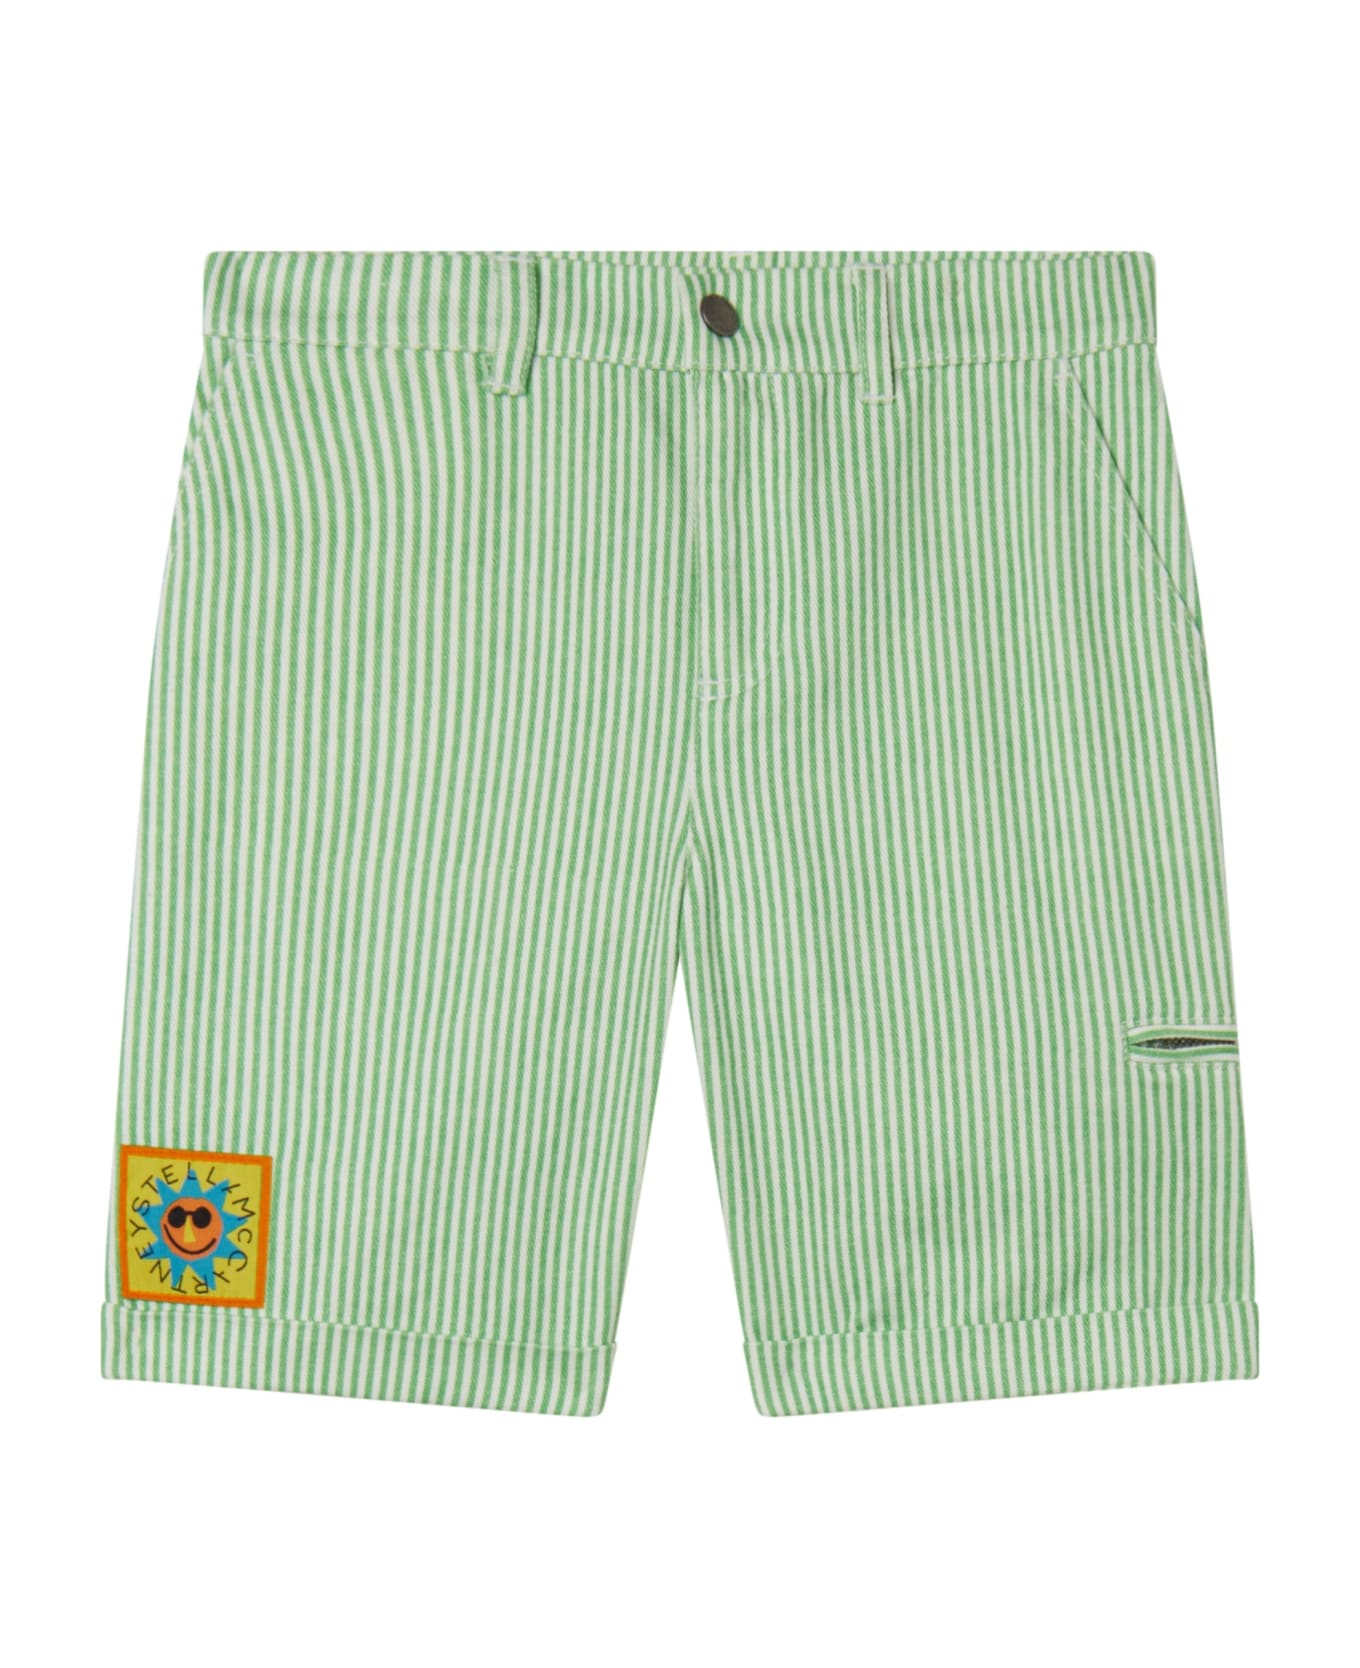 Stella McCartney Kids Pinstriped Shorts With Patch - Cream ボトムス